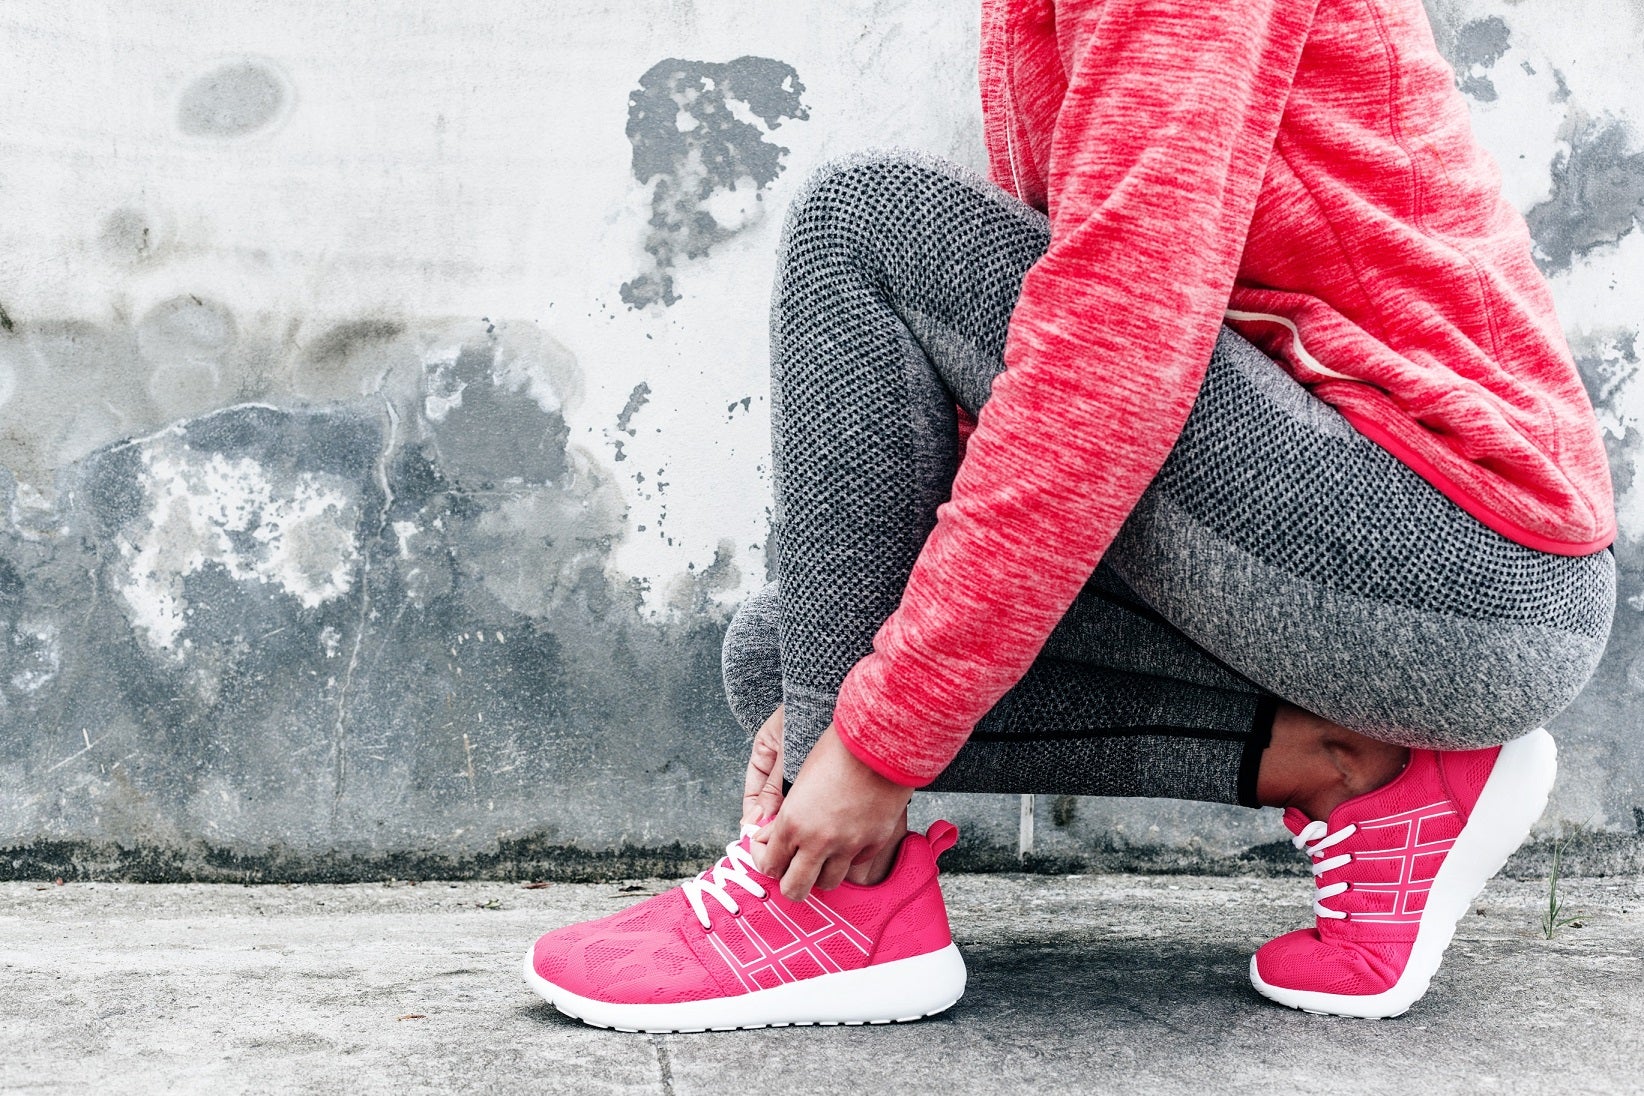 Athleisure looks set to reach a value of $570bn by 2023, says GlobalData